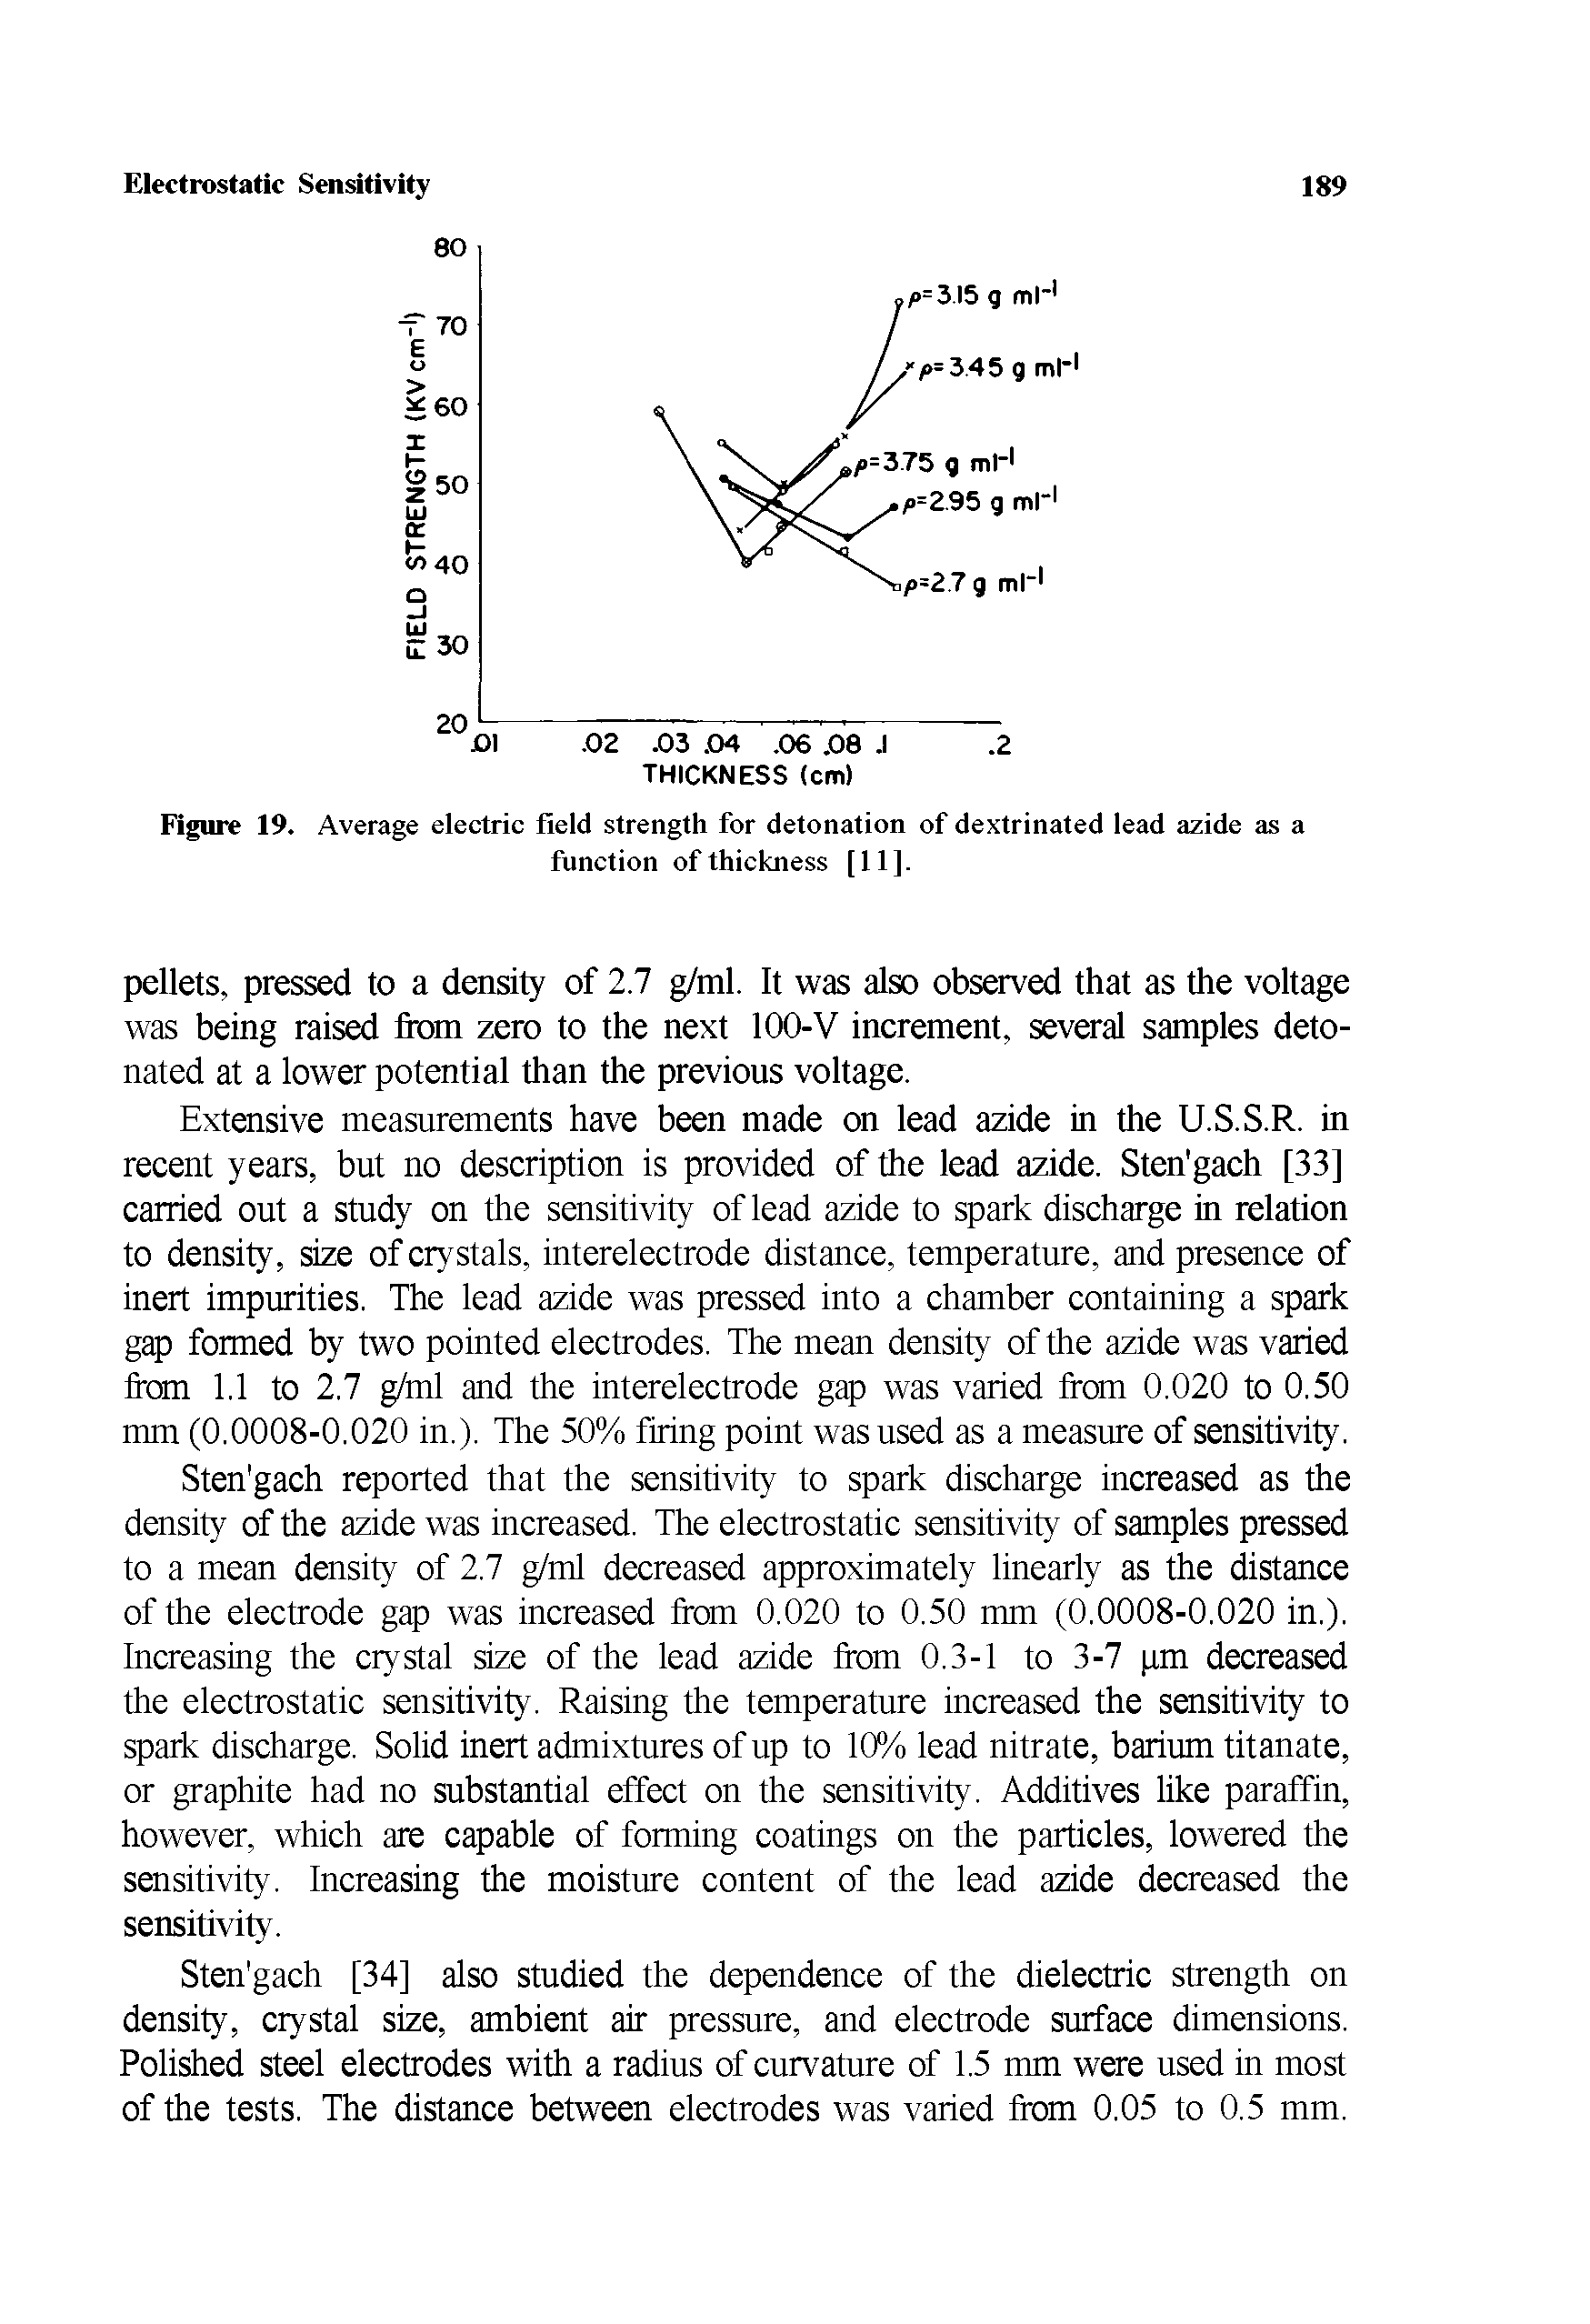 Figure 19. Average electric field strength for detonation of dextrinated lead azide as a function of thickness [11].